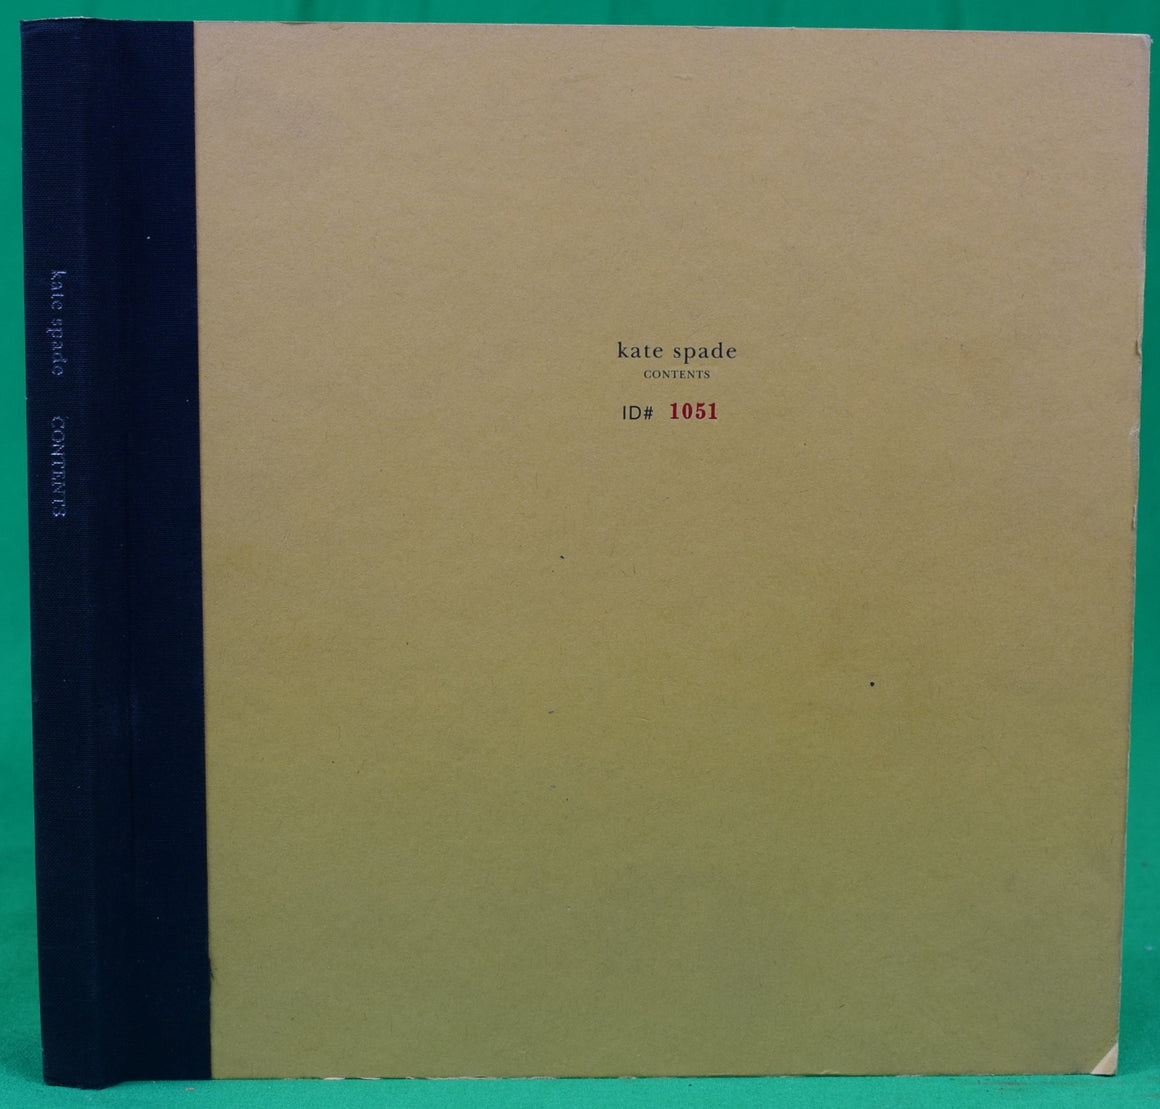 "Kate Spade Contents: ID# 1051" 2000